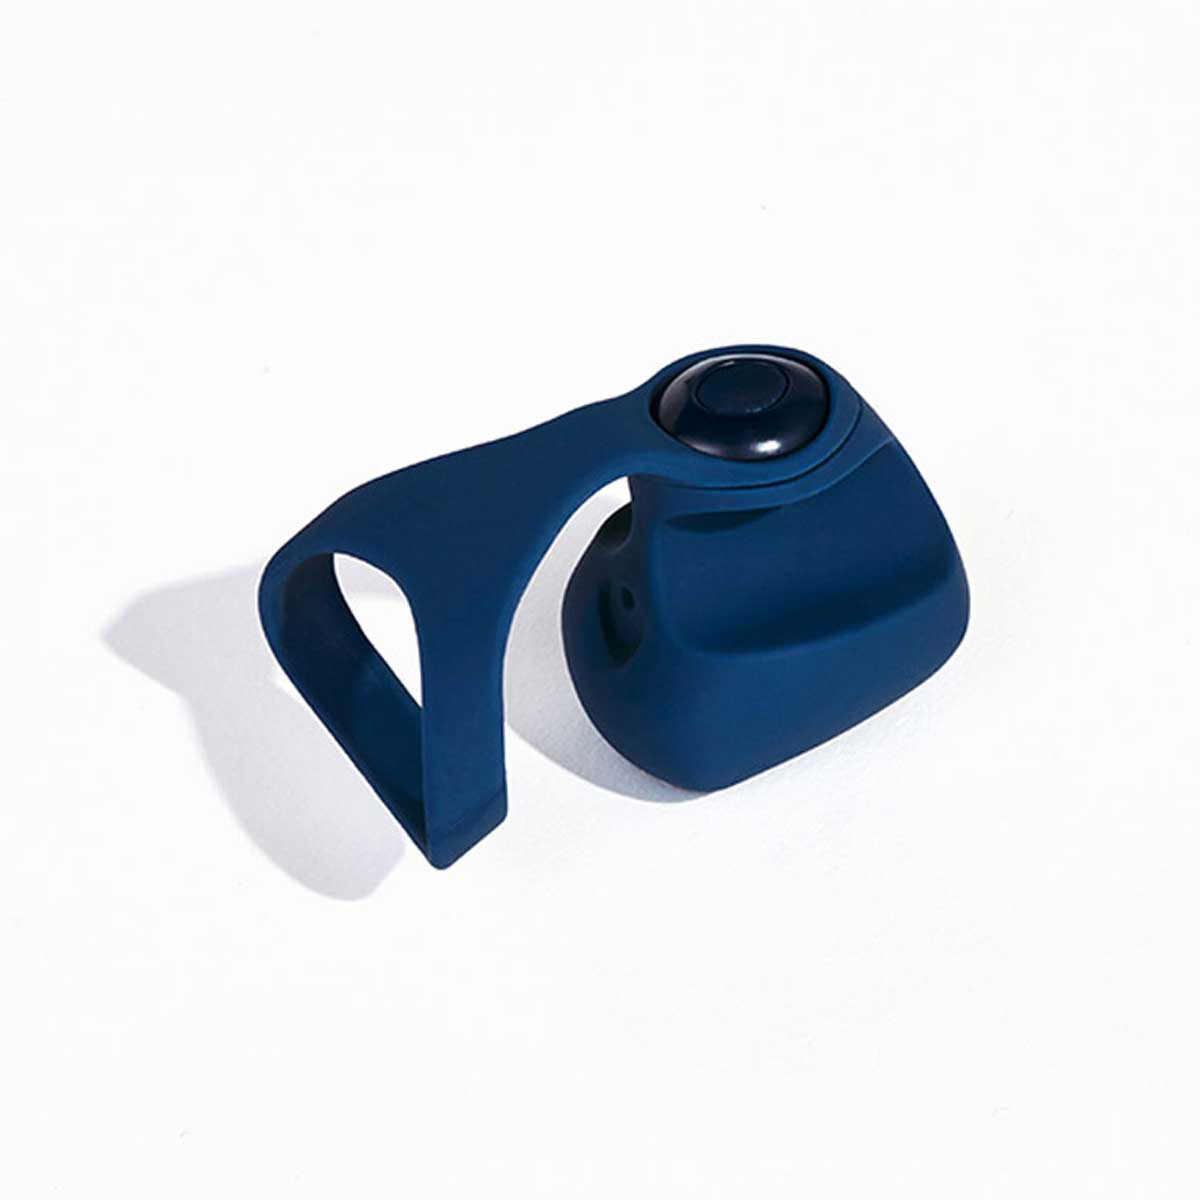 Dame Products Fin Wearable Vibrator for the Fingers Navy